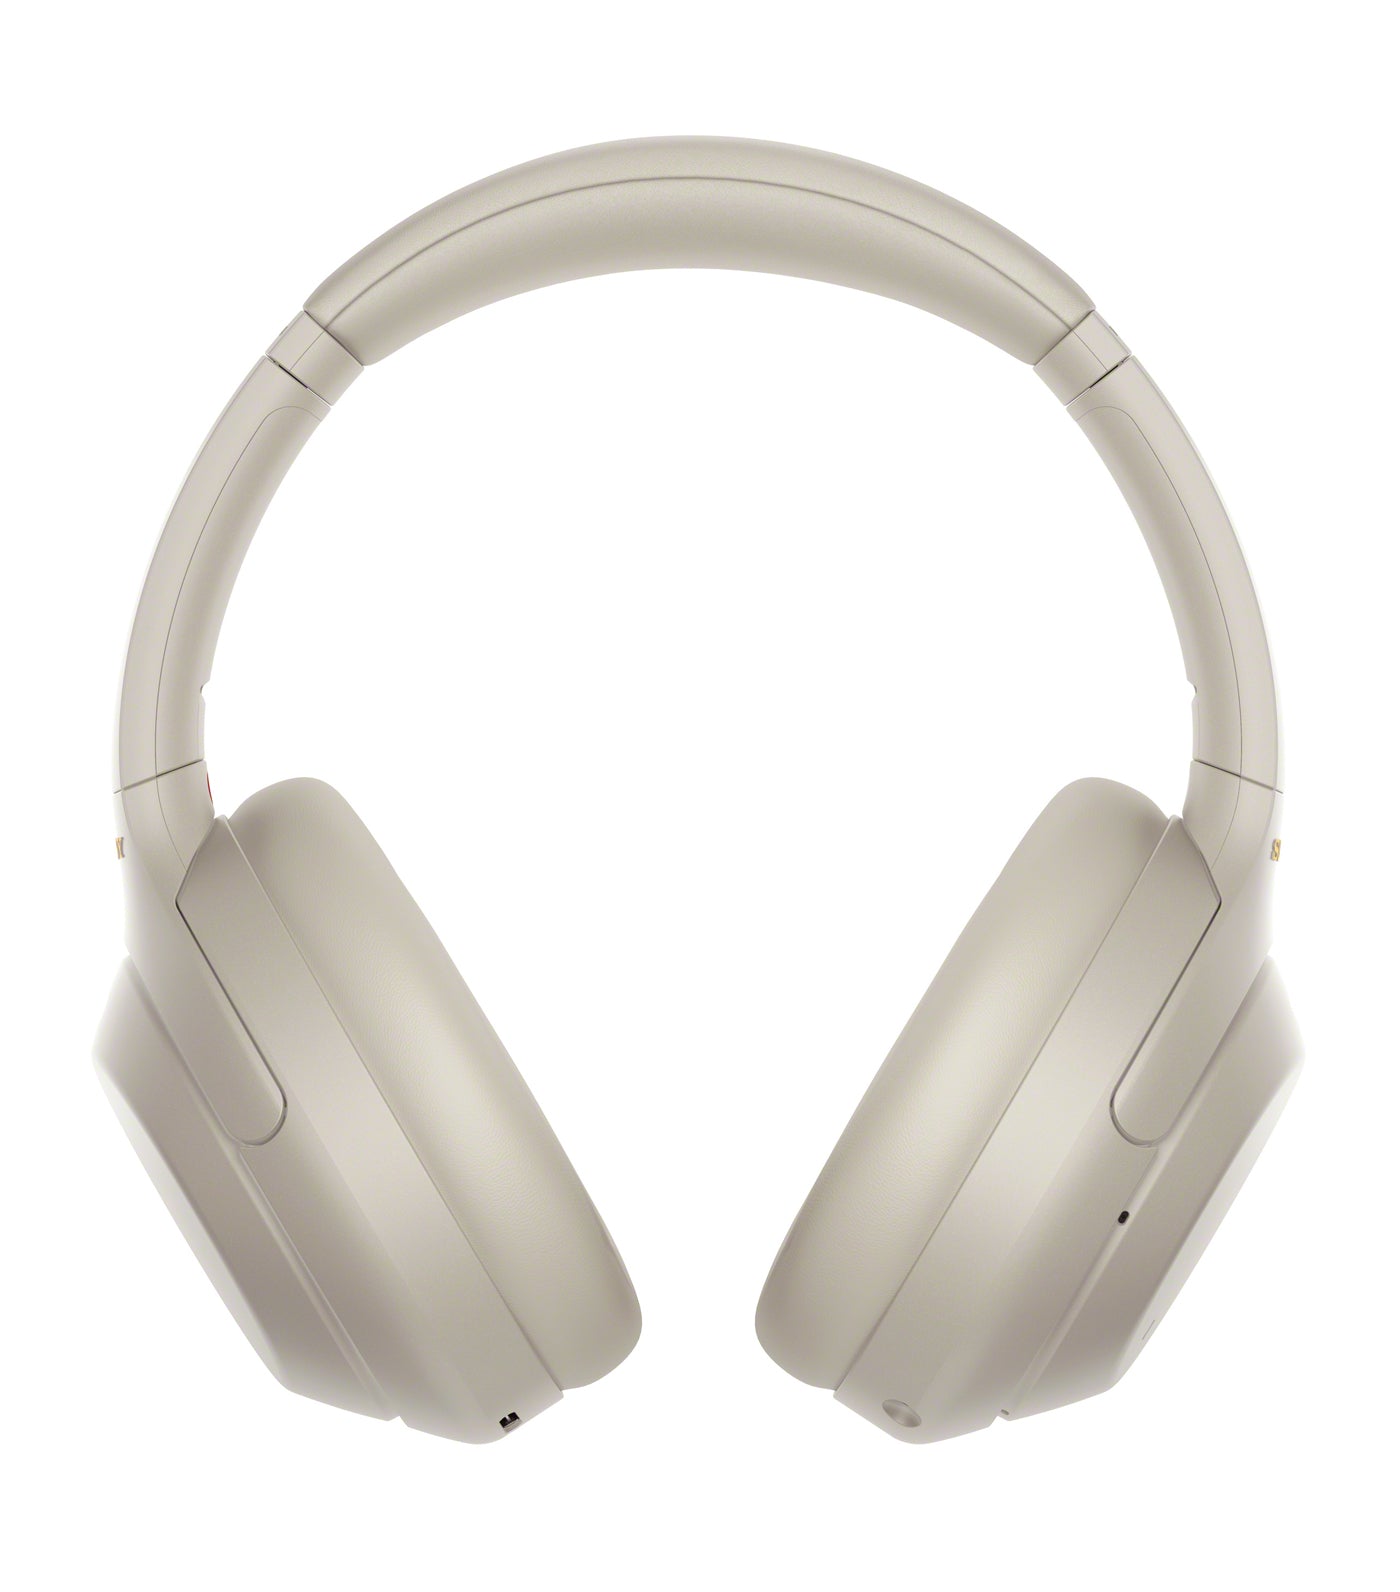 WH-1000XM4 Wireless Noise-Canceling Headphones Silver